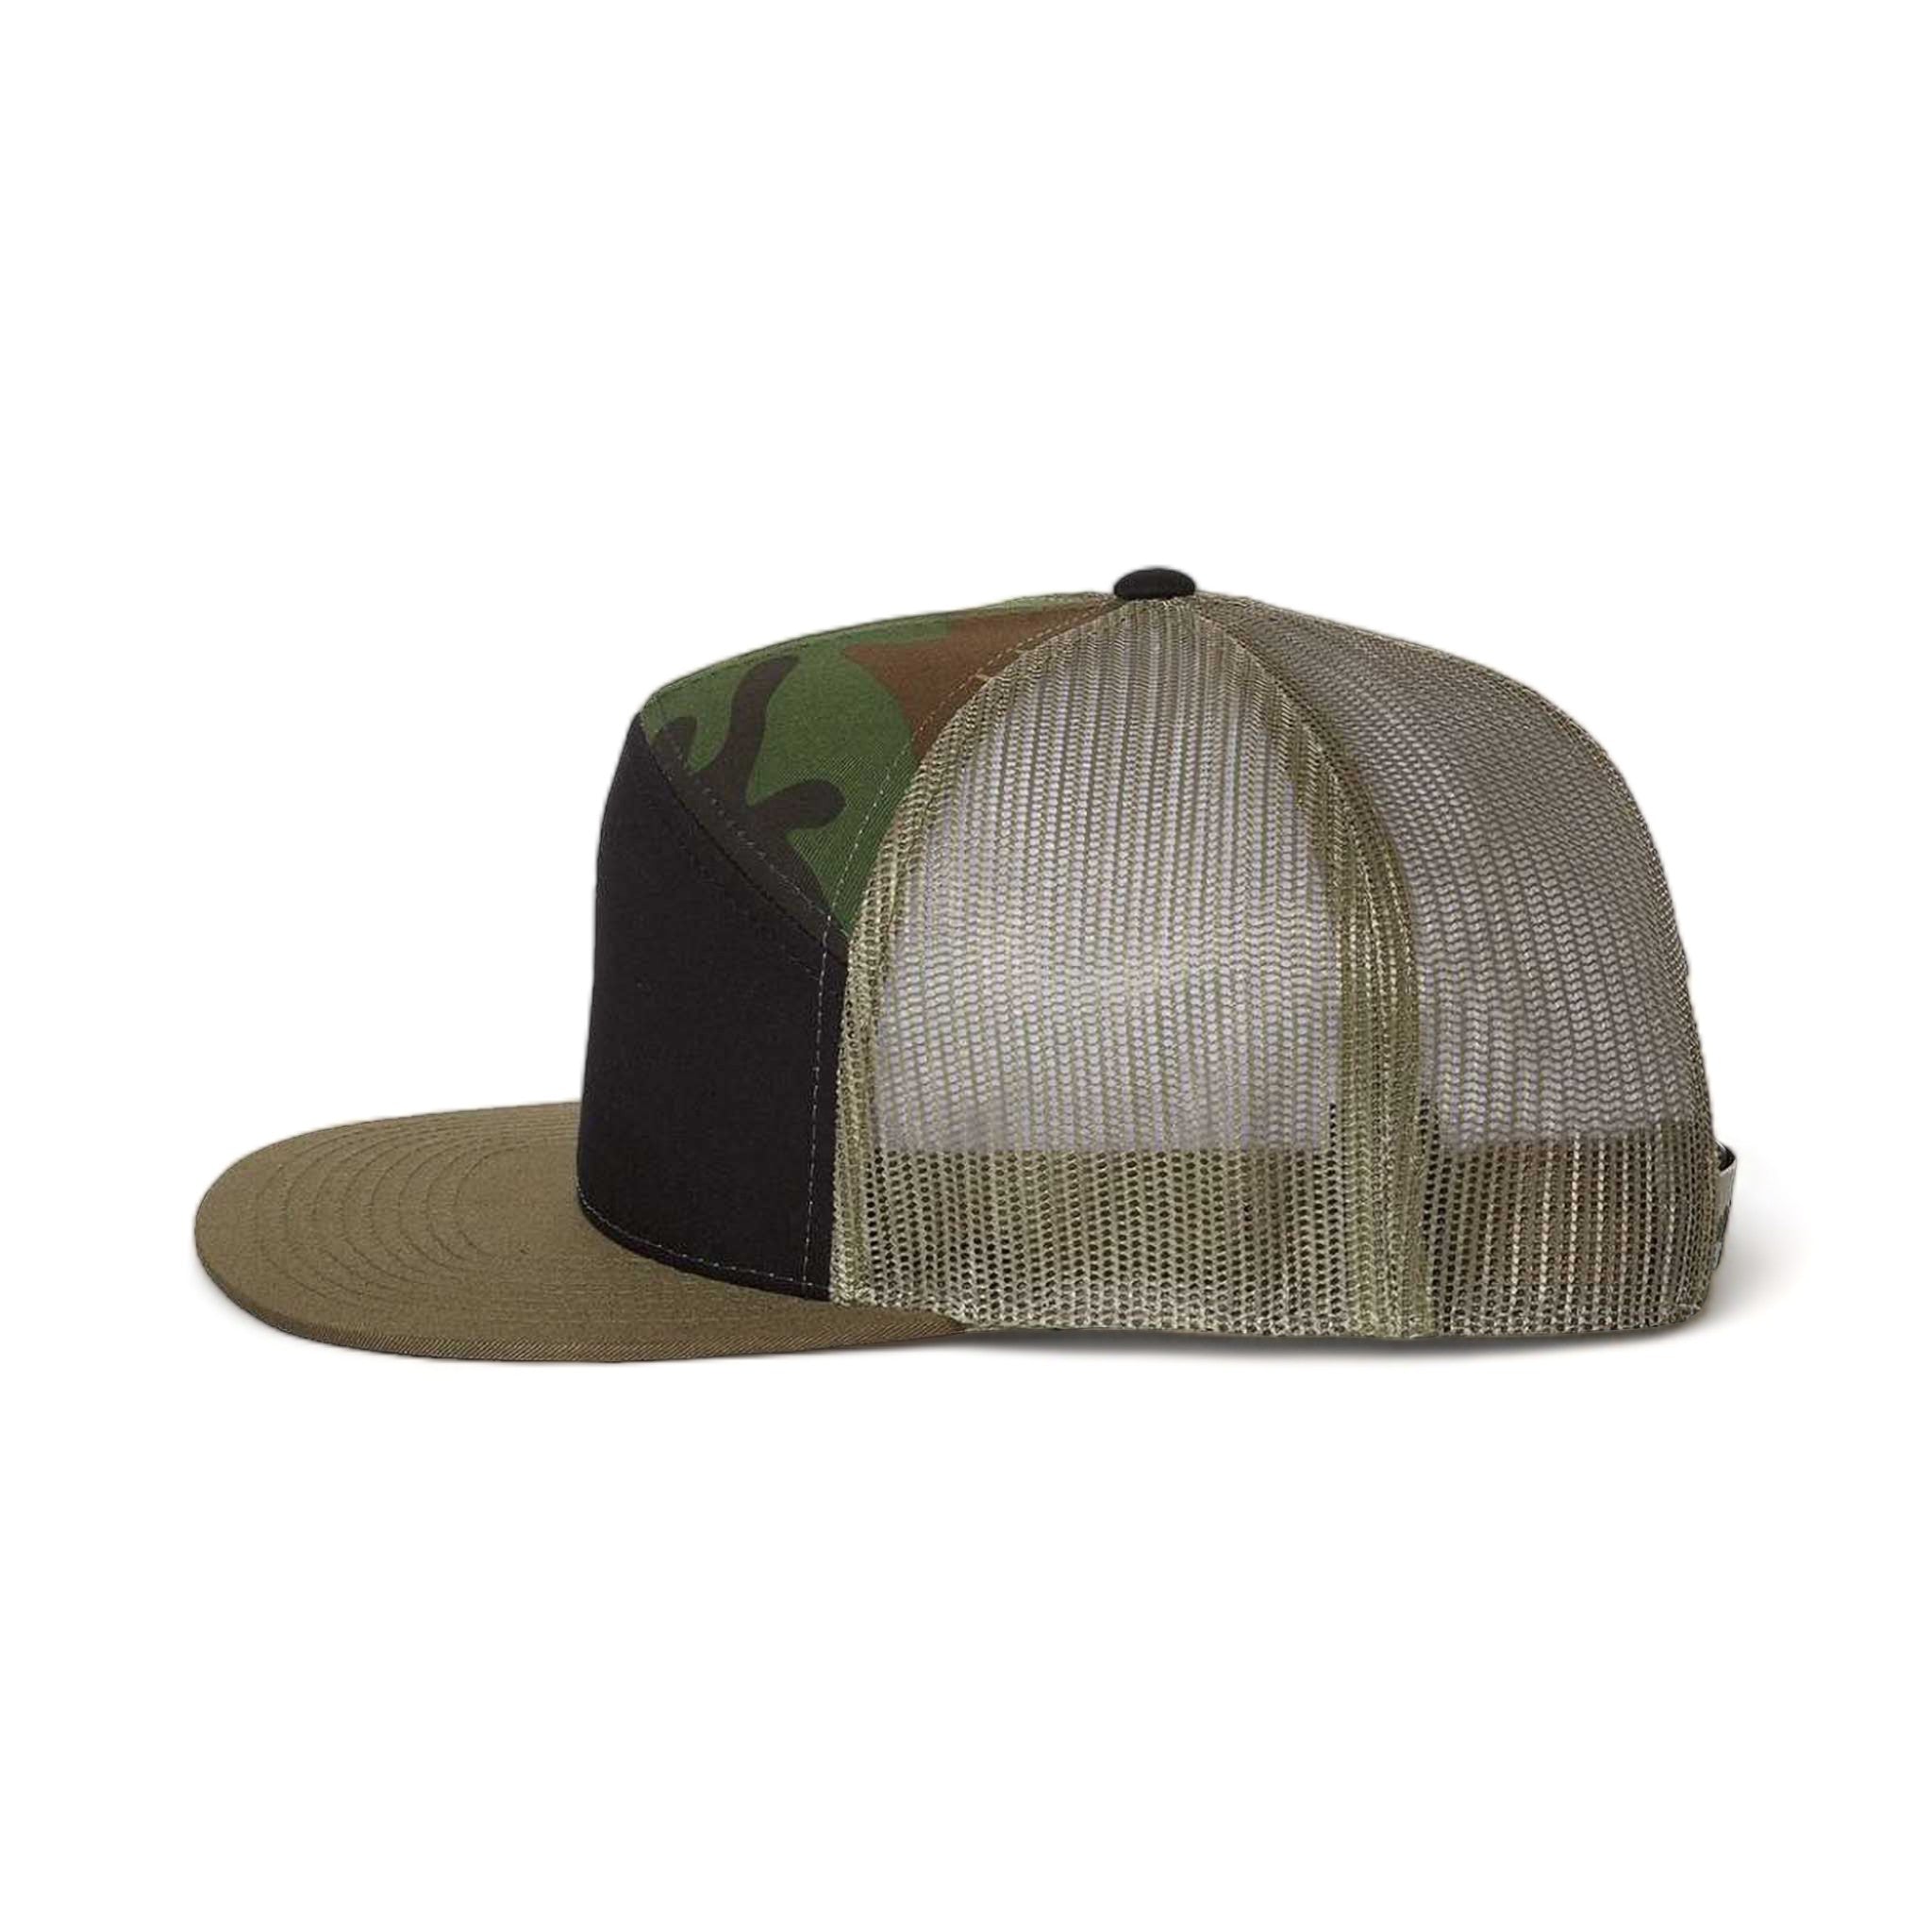 Side view of Richardson 168 custom hat in black, camo and loden